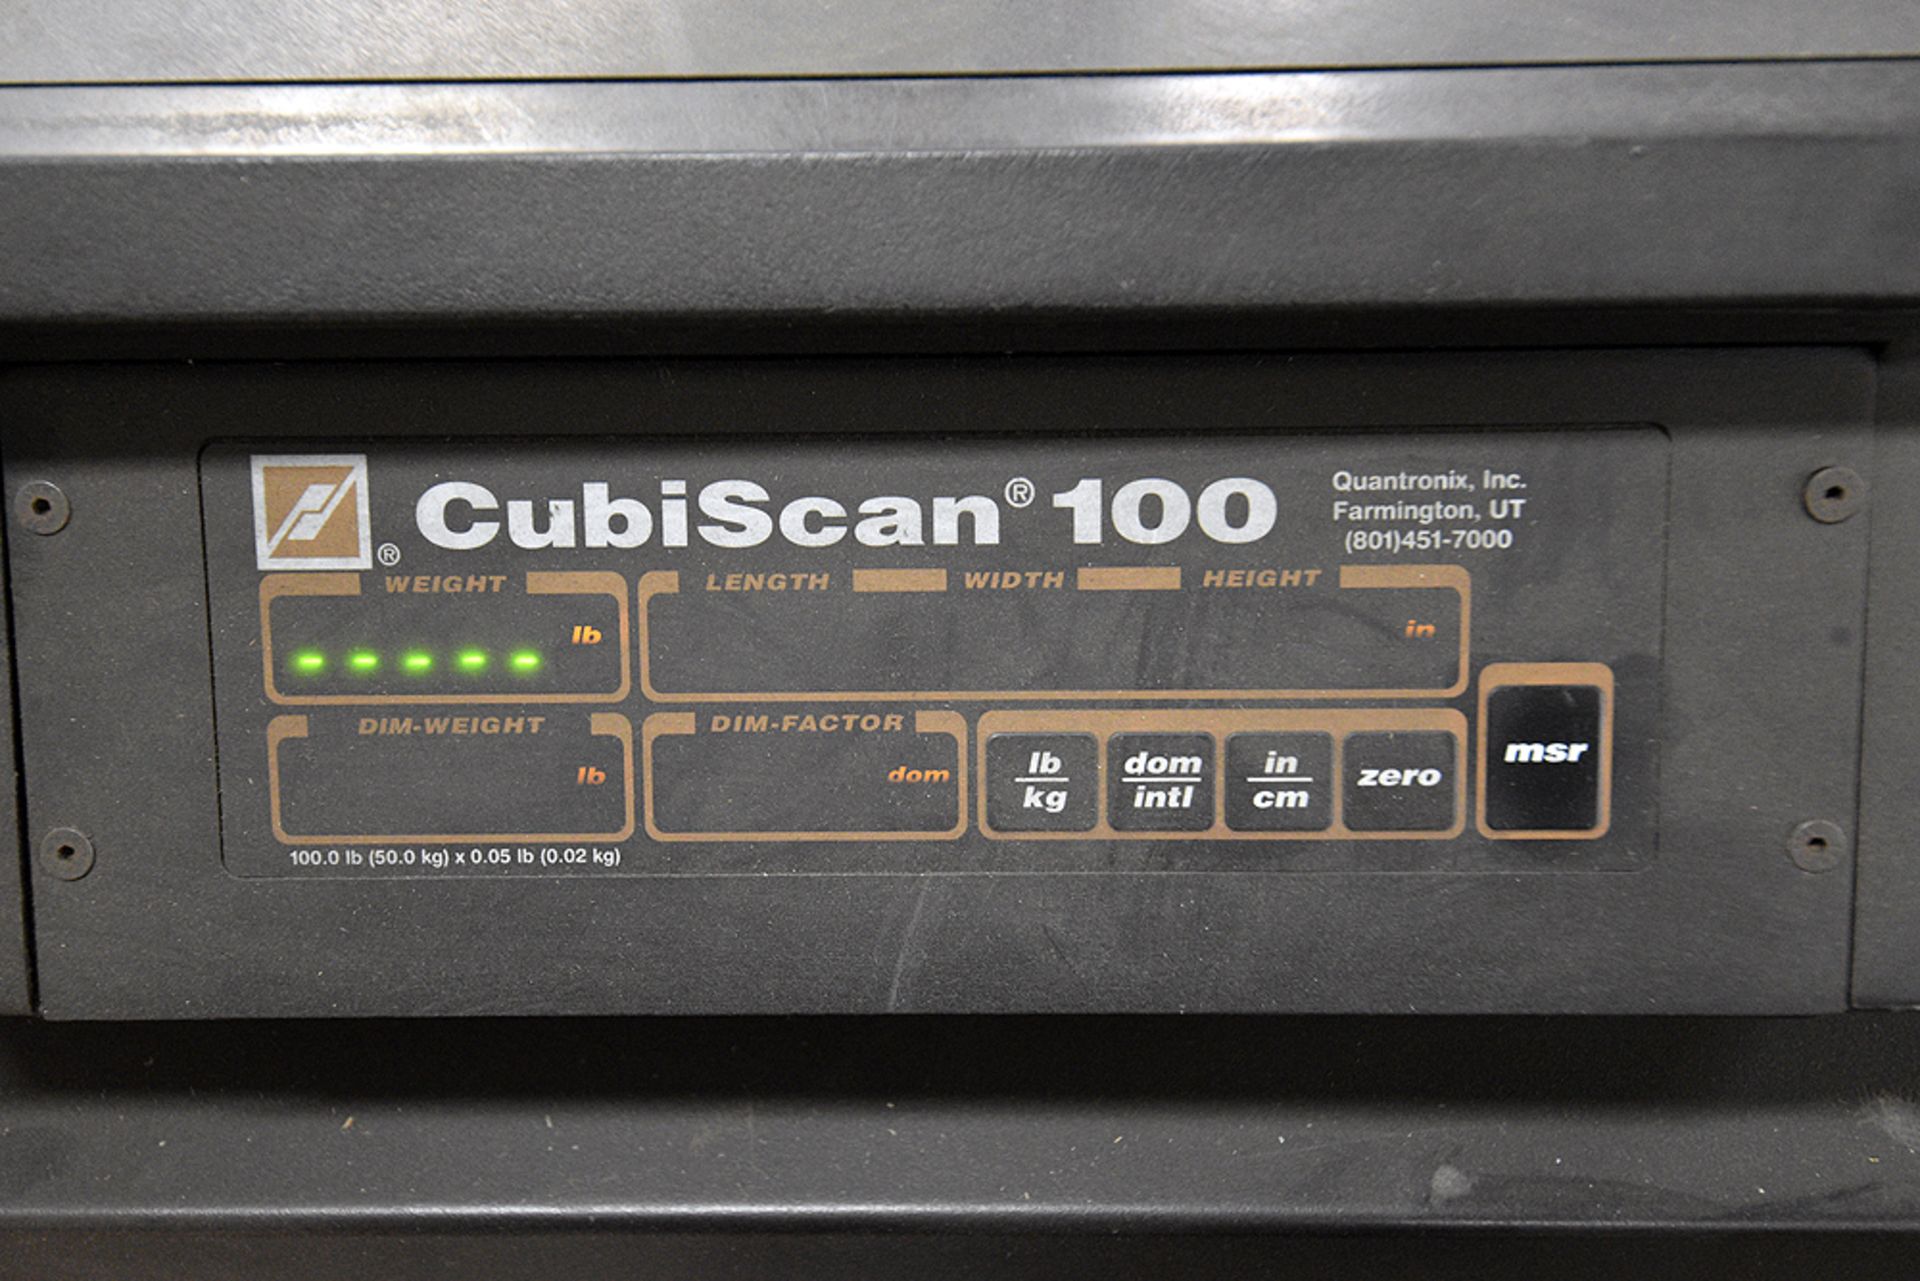 Cubiscan 100 Cubing and Weighing System - Image 3 of 4